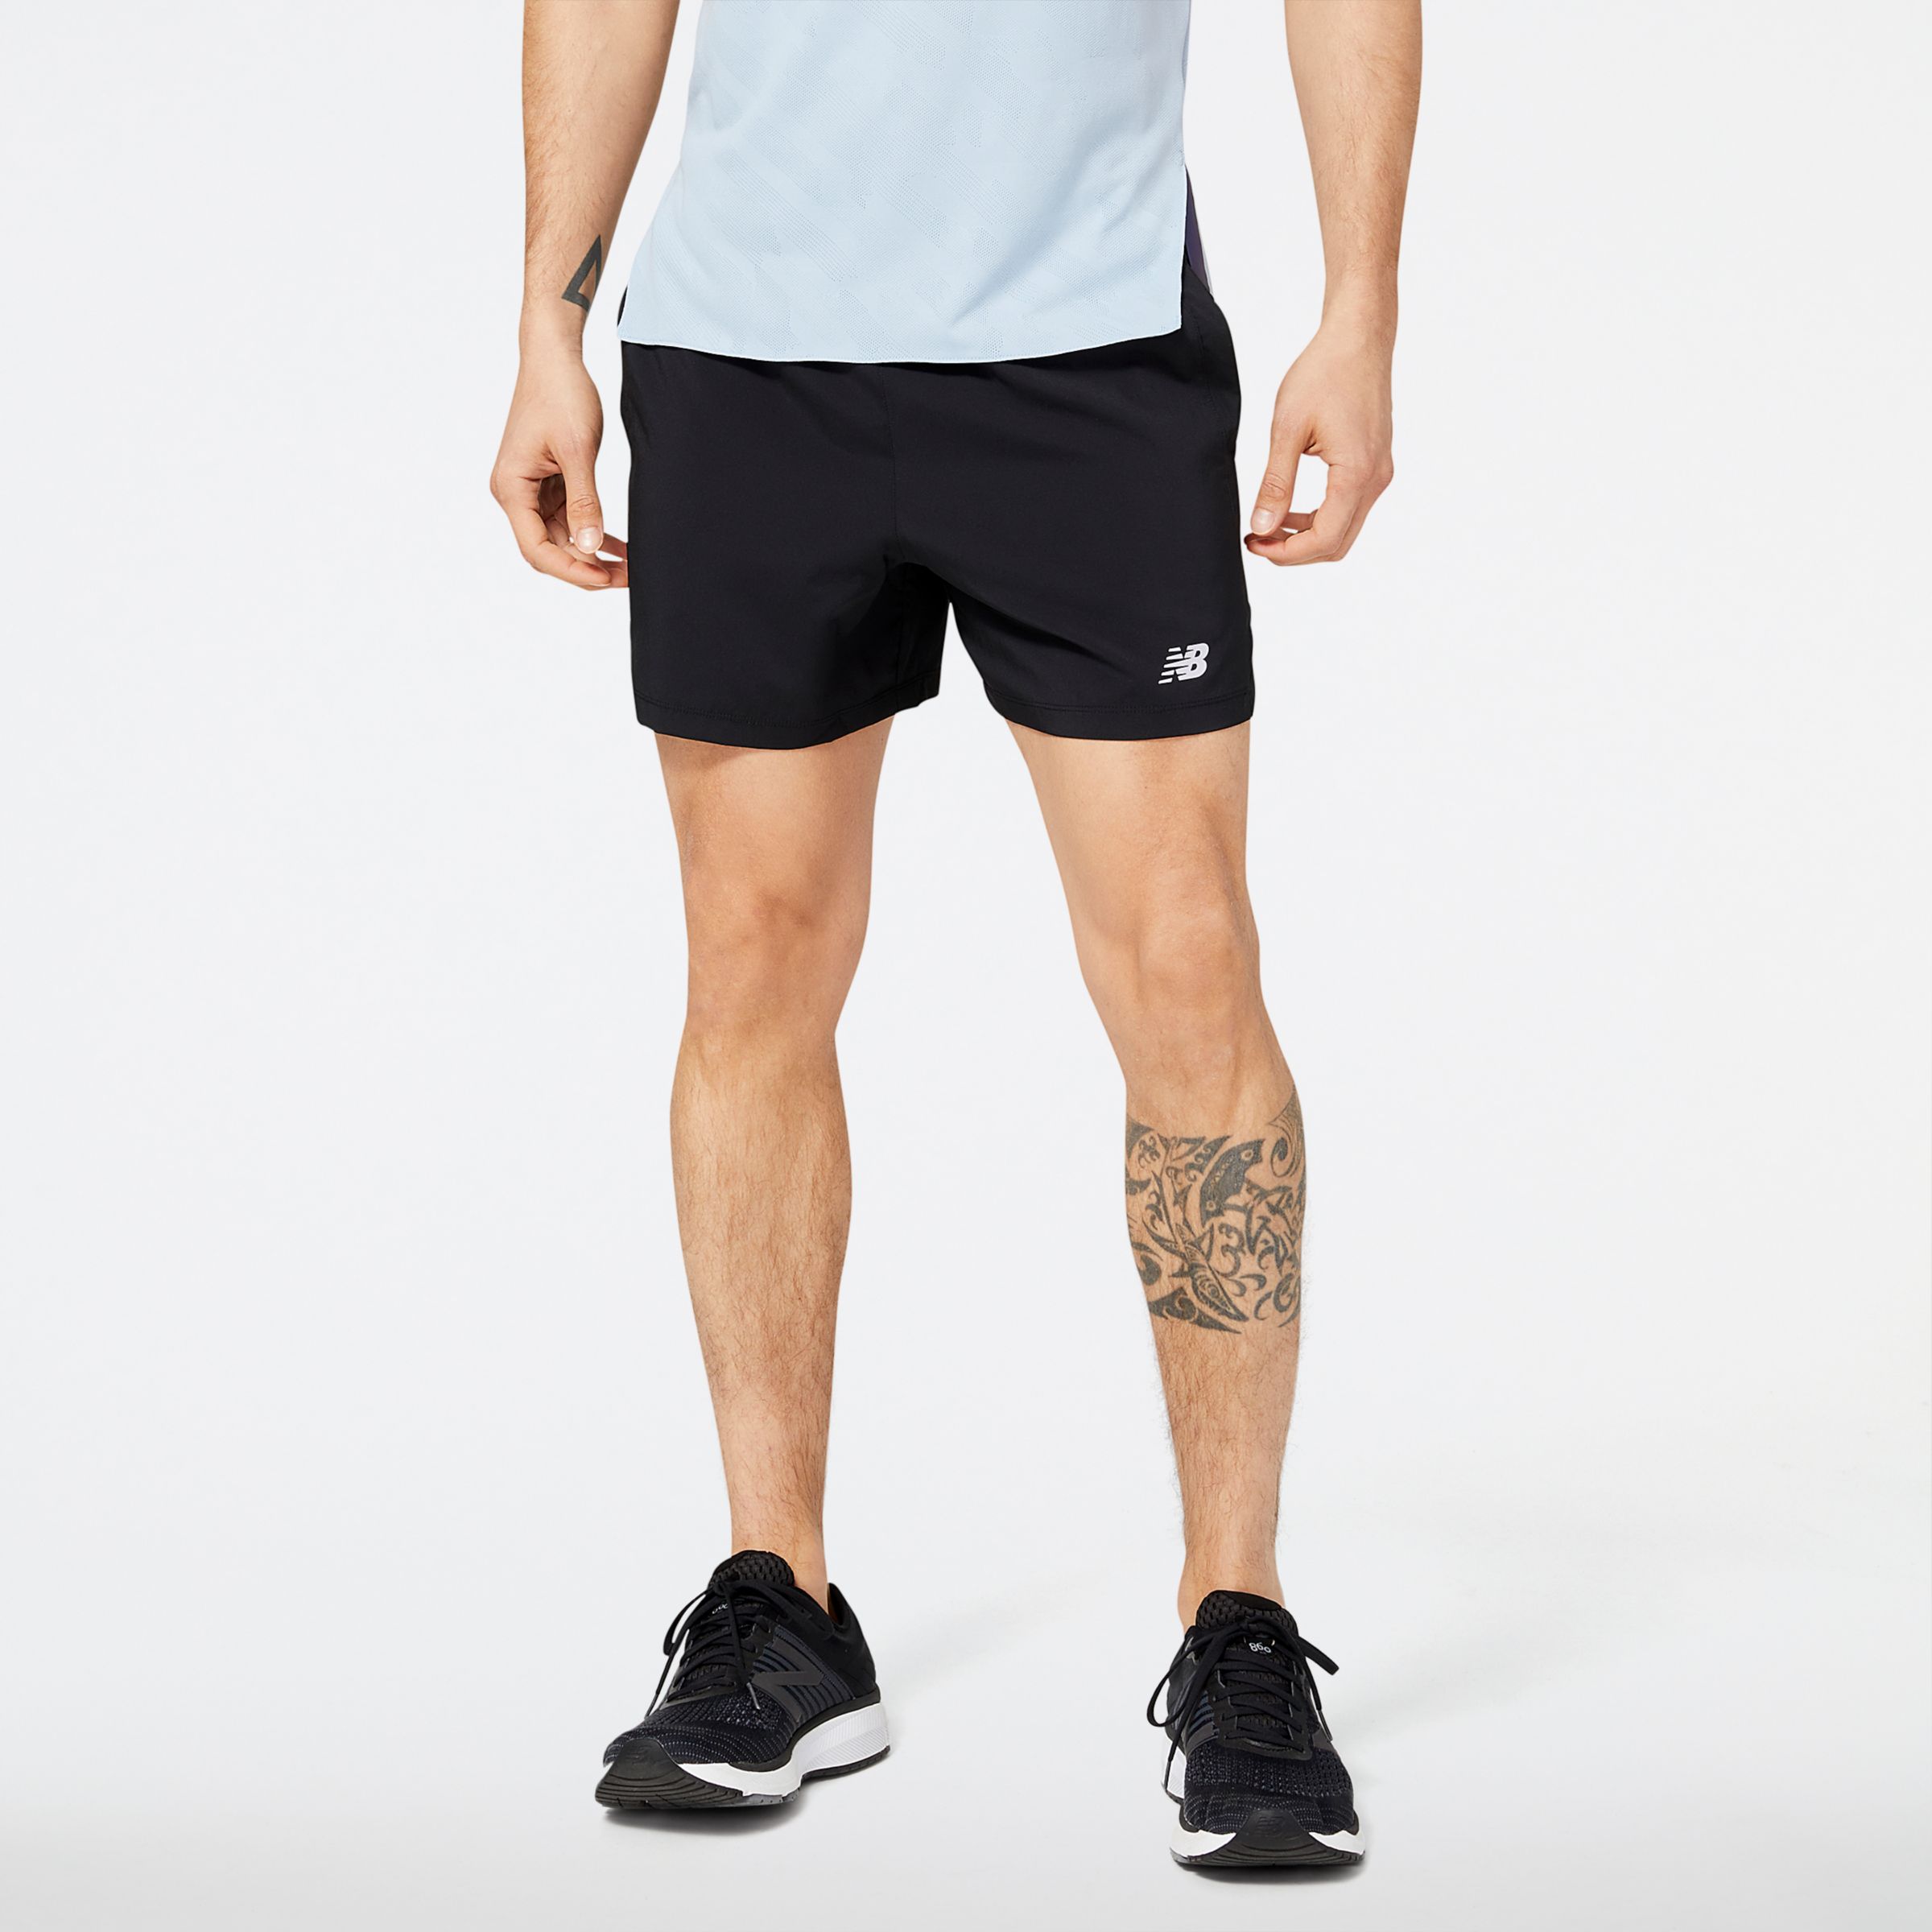 Buy New Balance men fitted fit accelerate tight black Online